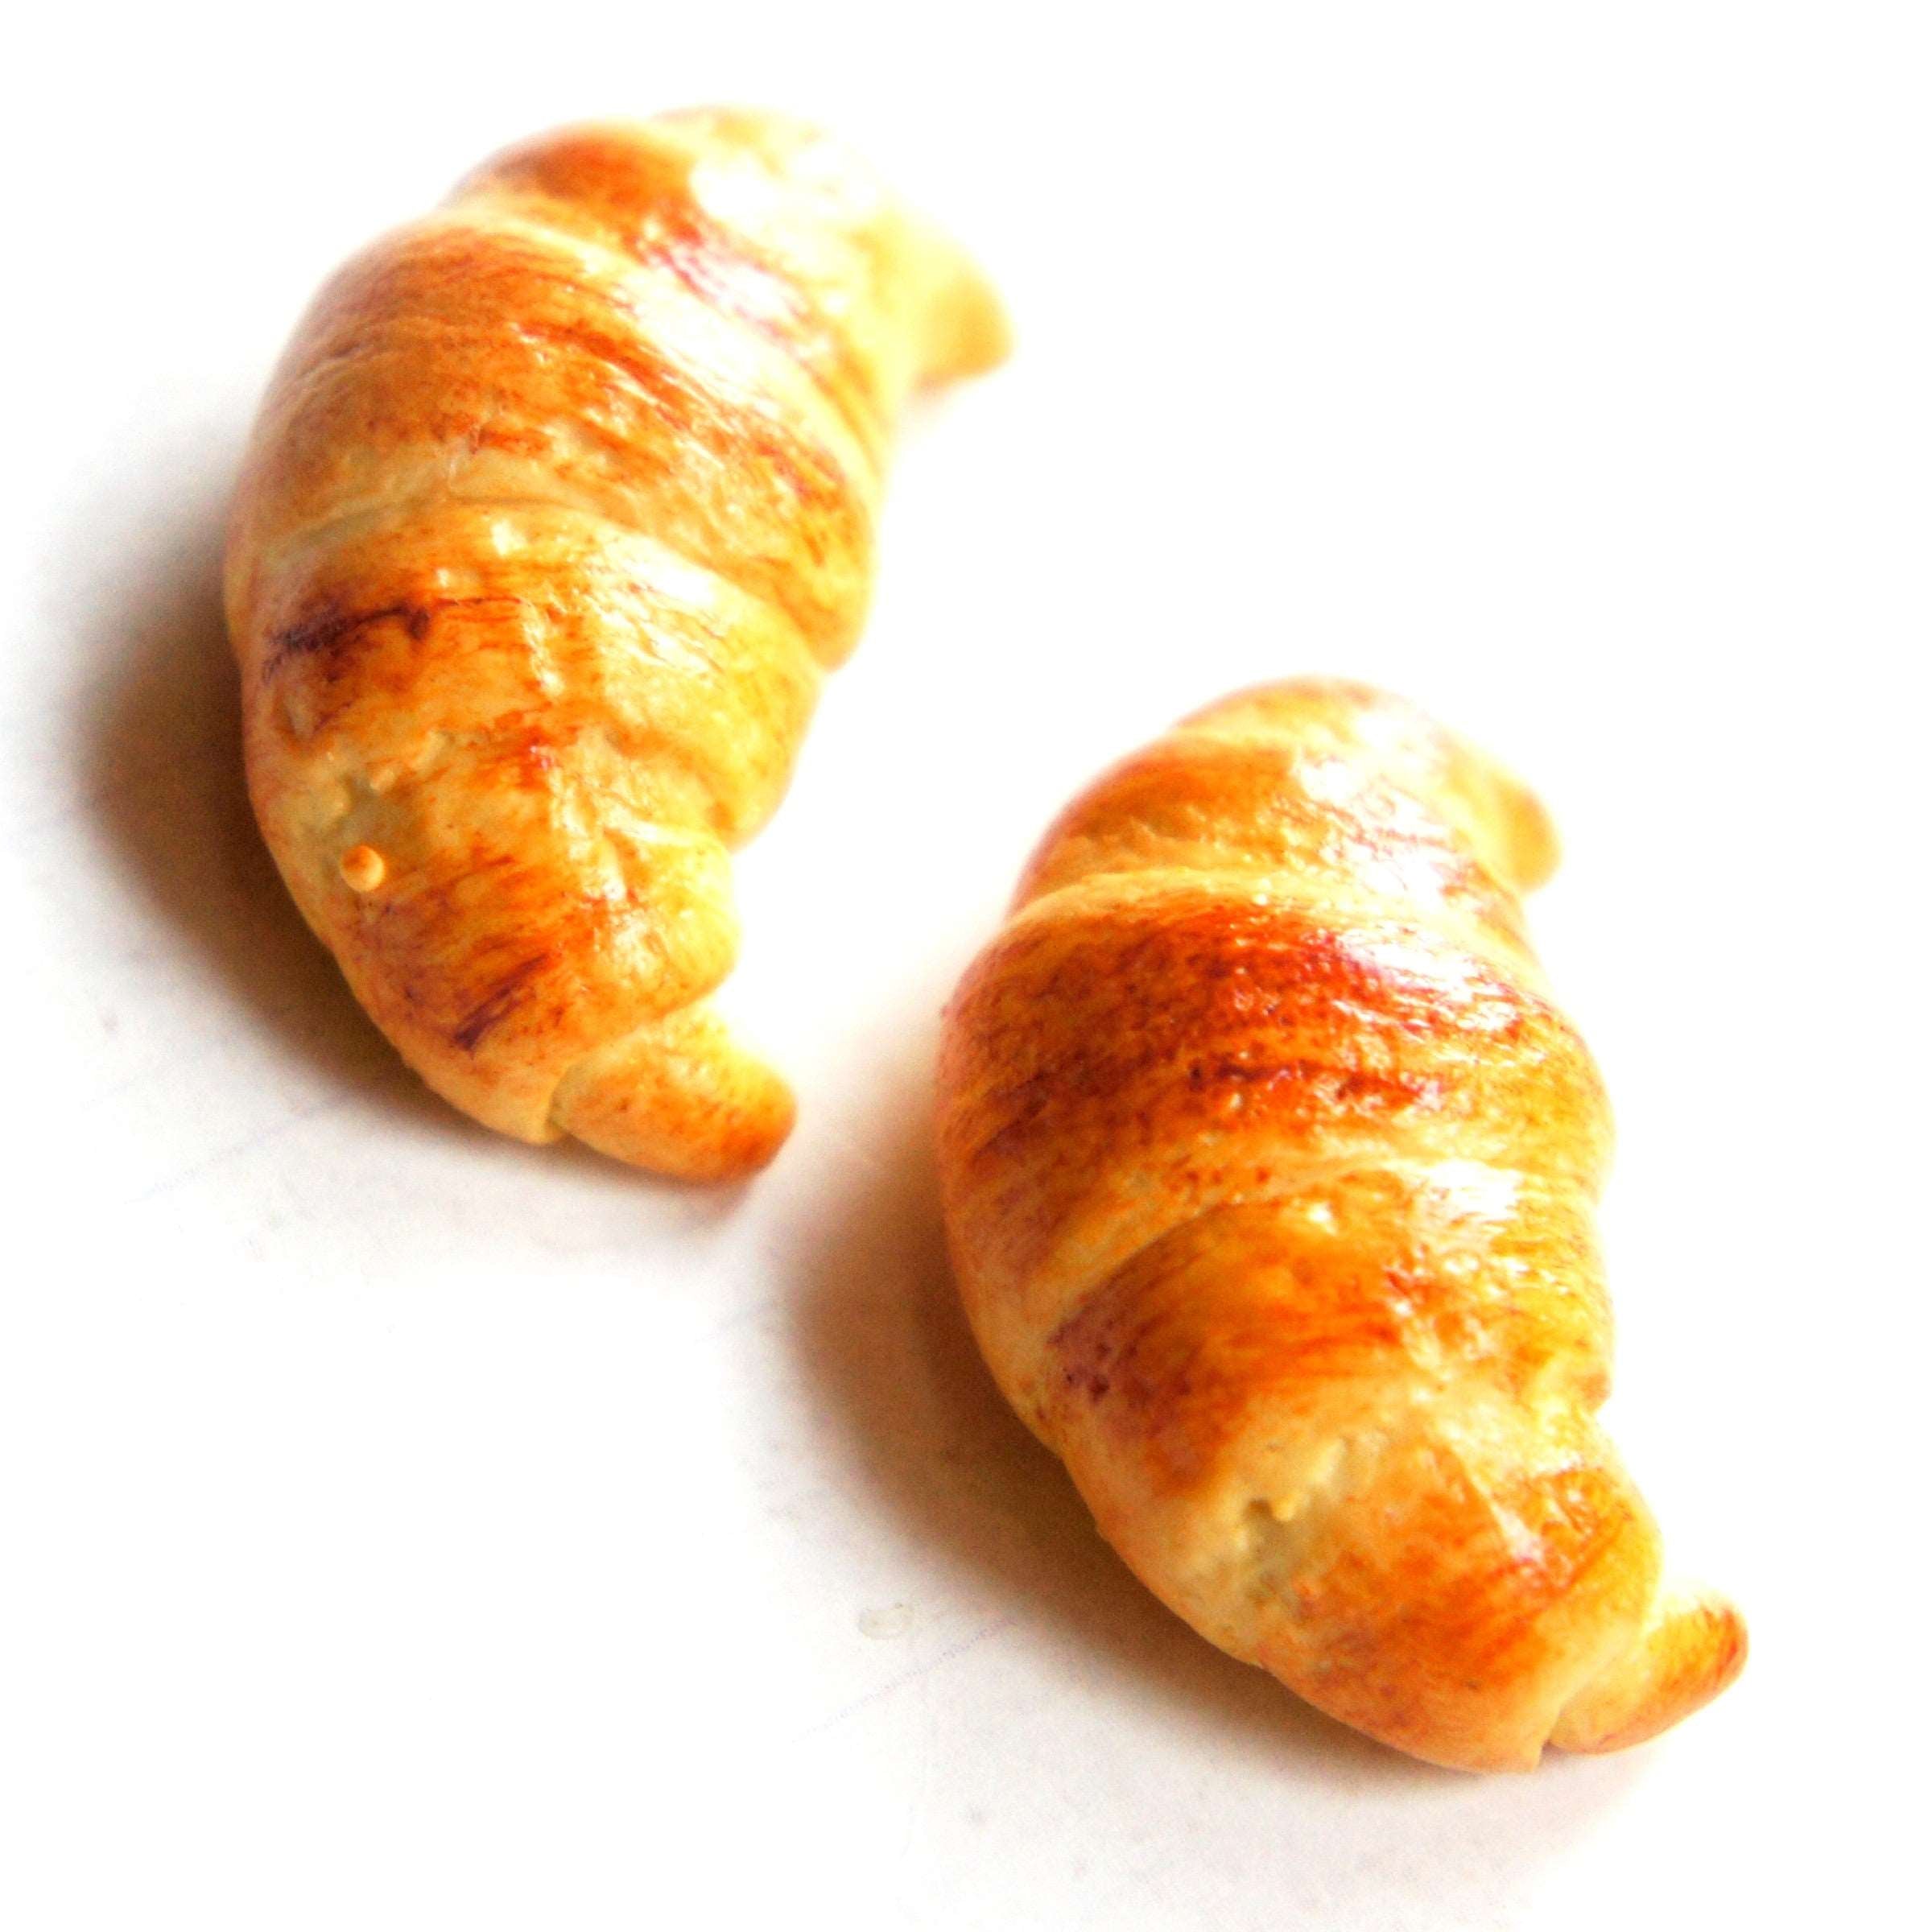 Croissant Magnet - Jillicious charms and accessories